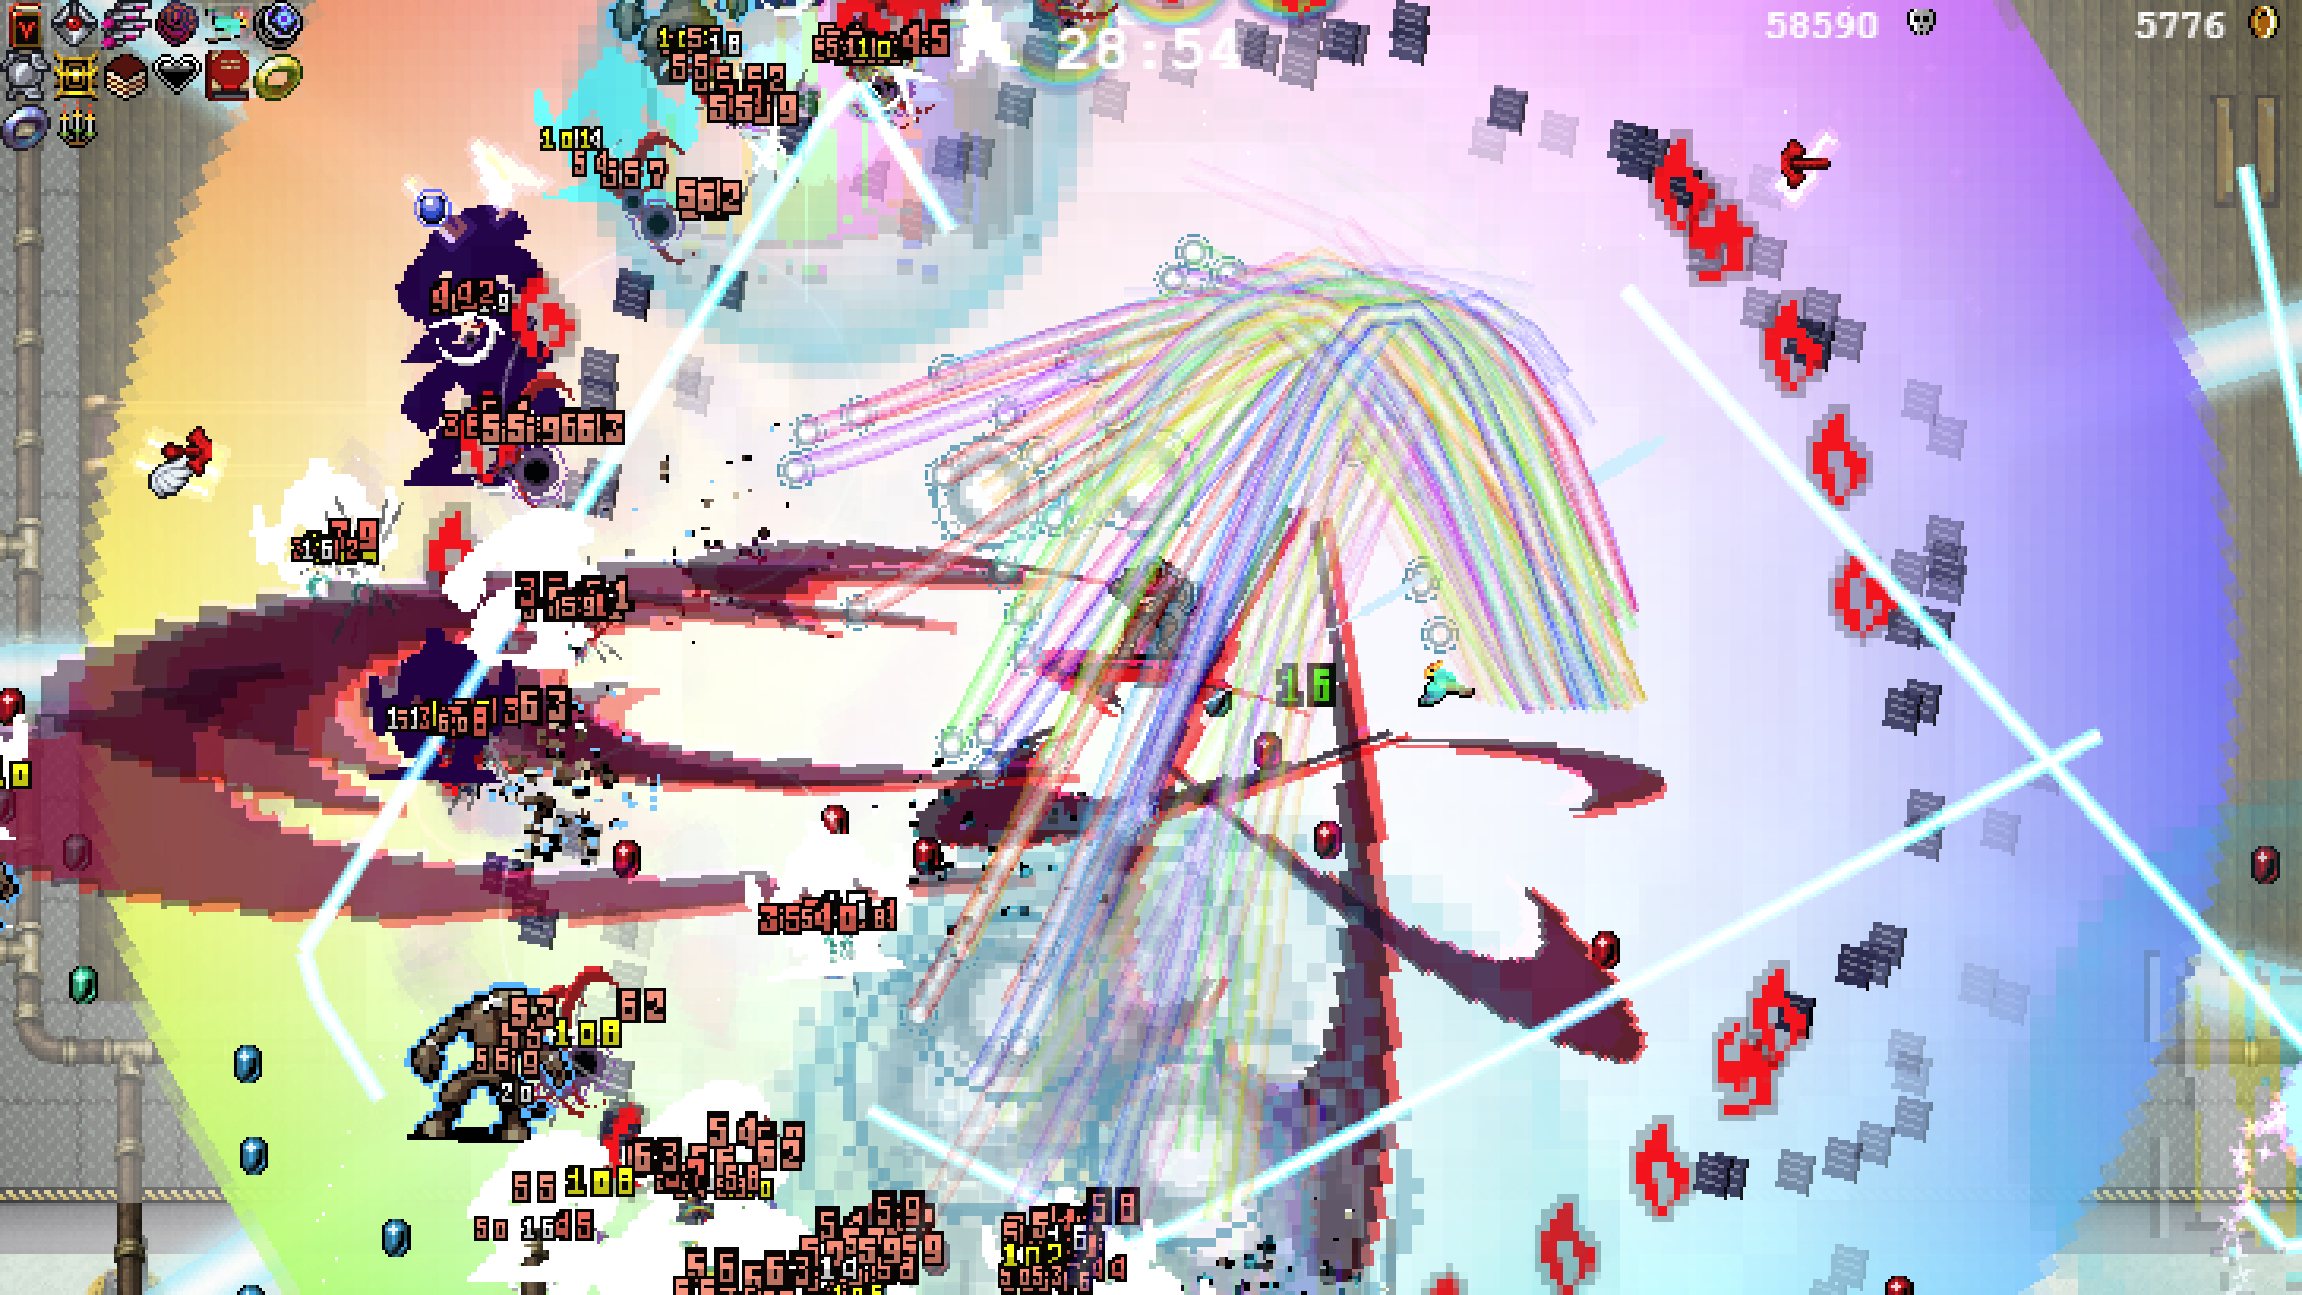 A colorful mess of explosions obscuring the screen in a screenshot from Vampire Survivors.